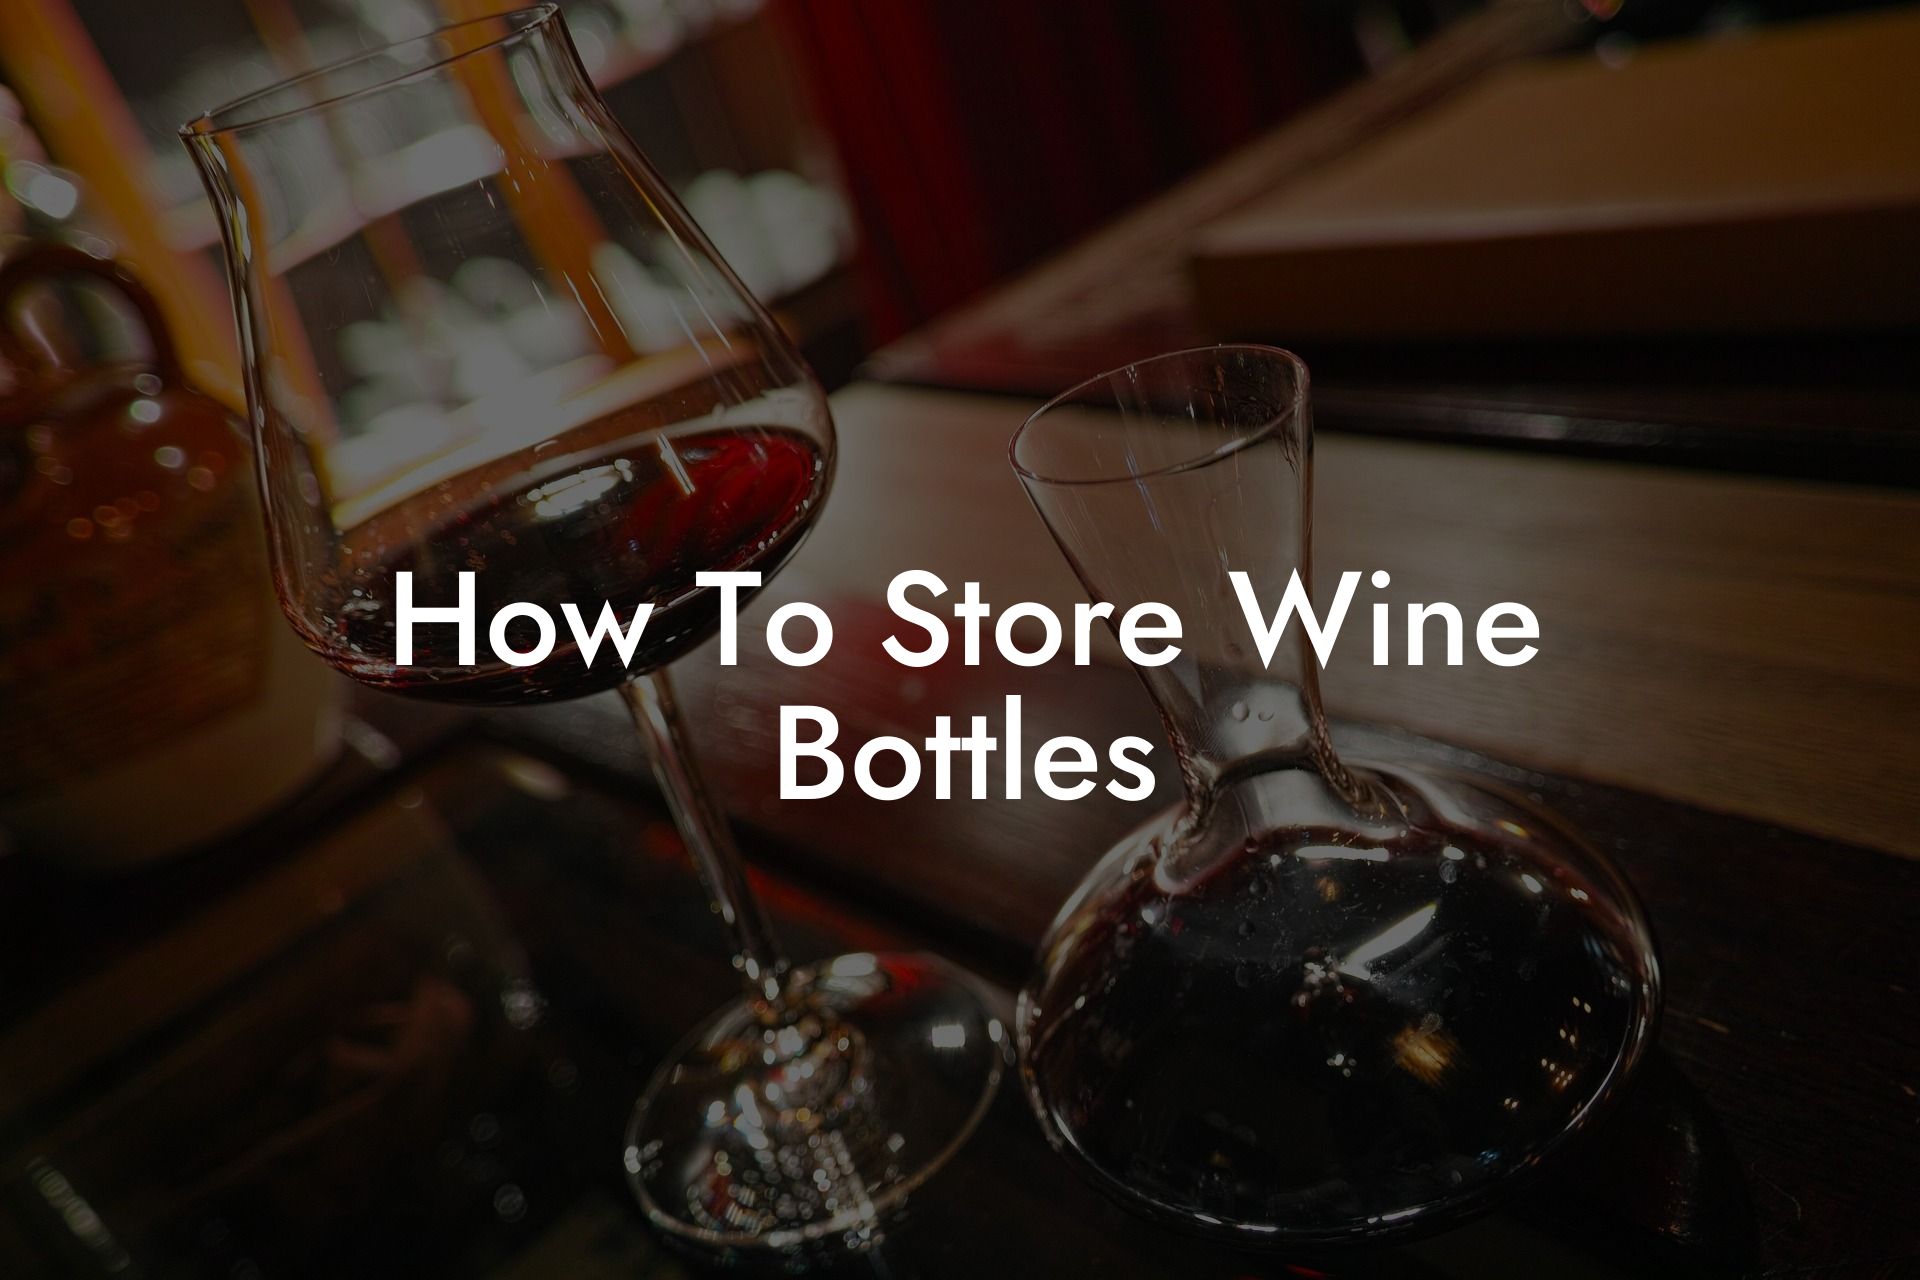 How To Store Wine Bottles